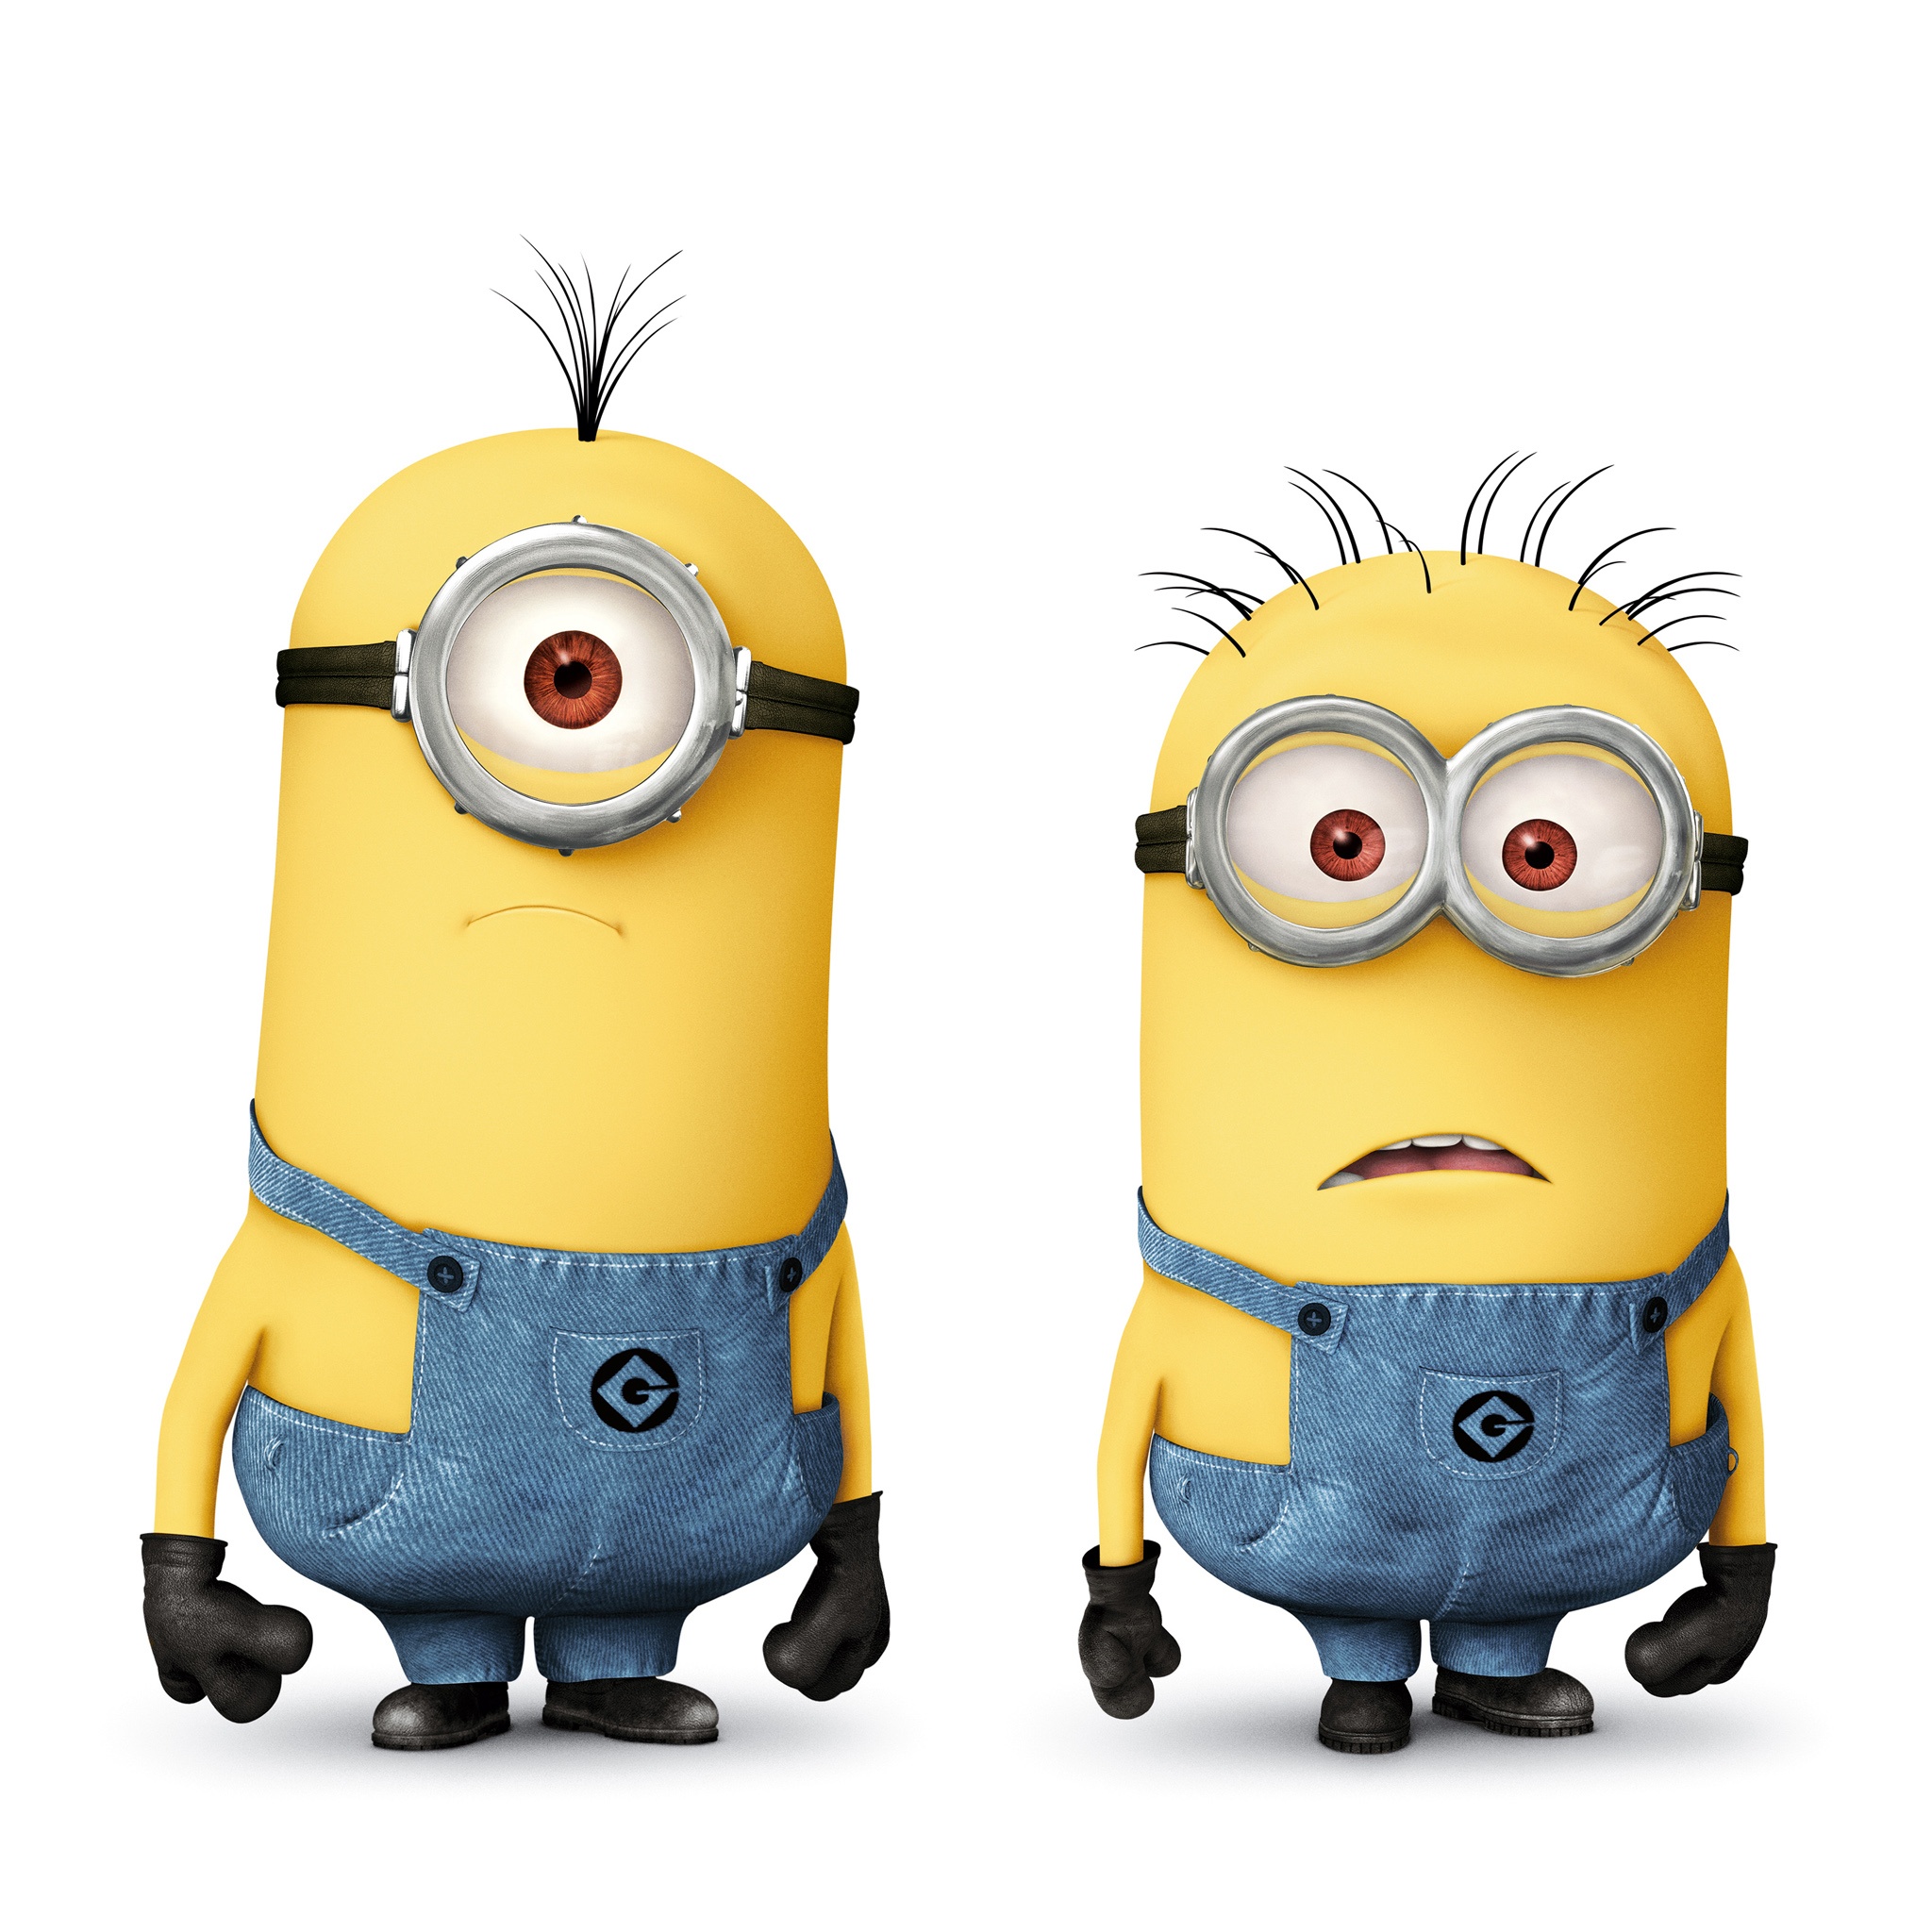 Minions In Despicable Me 2 Hd Wallpaper   Ihd Wallpapers